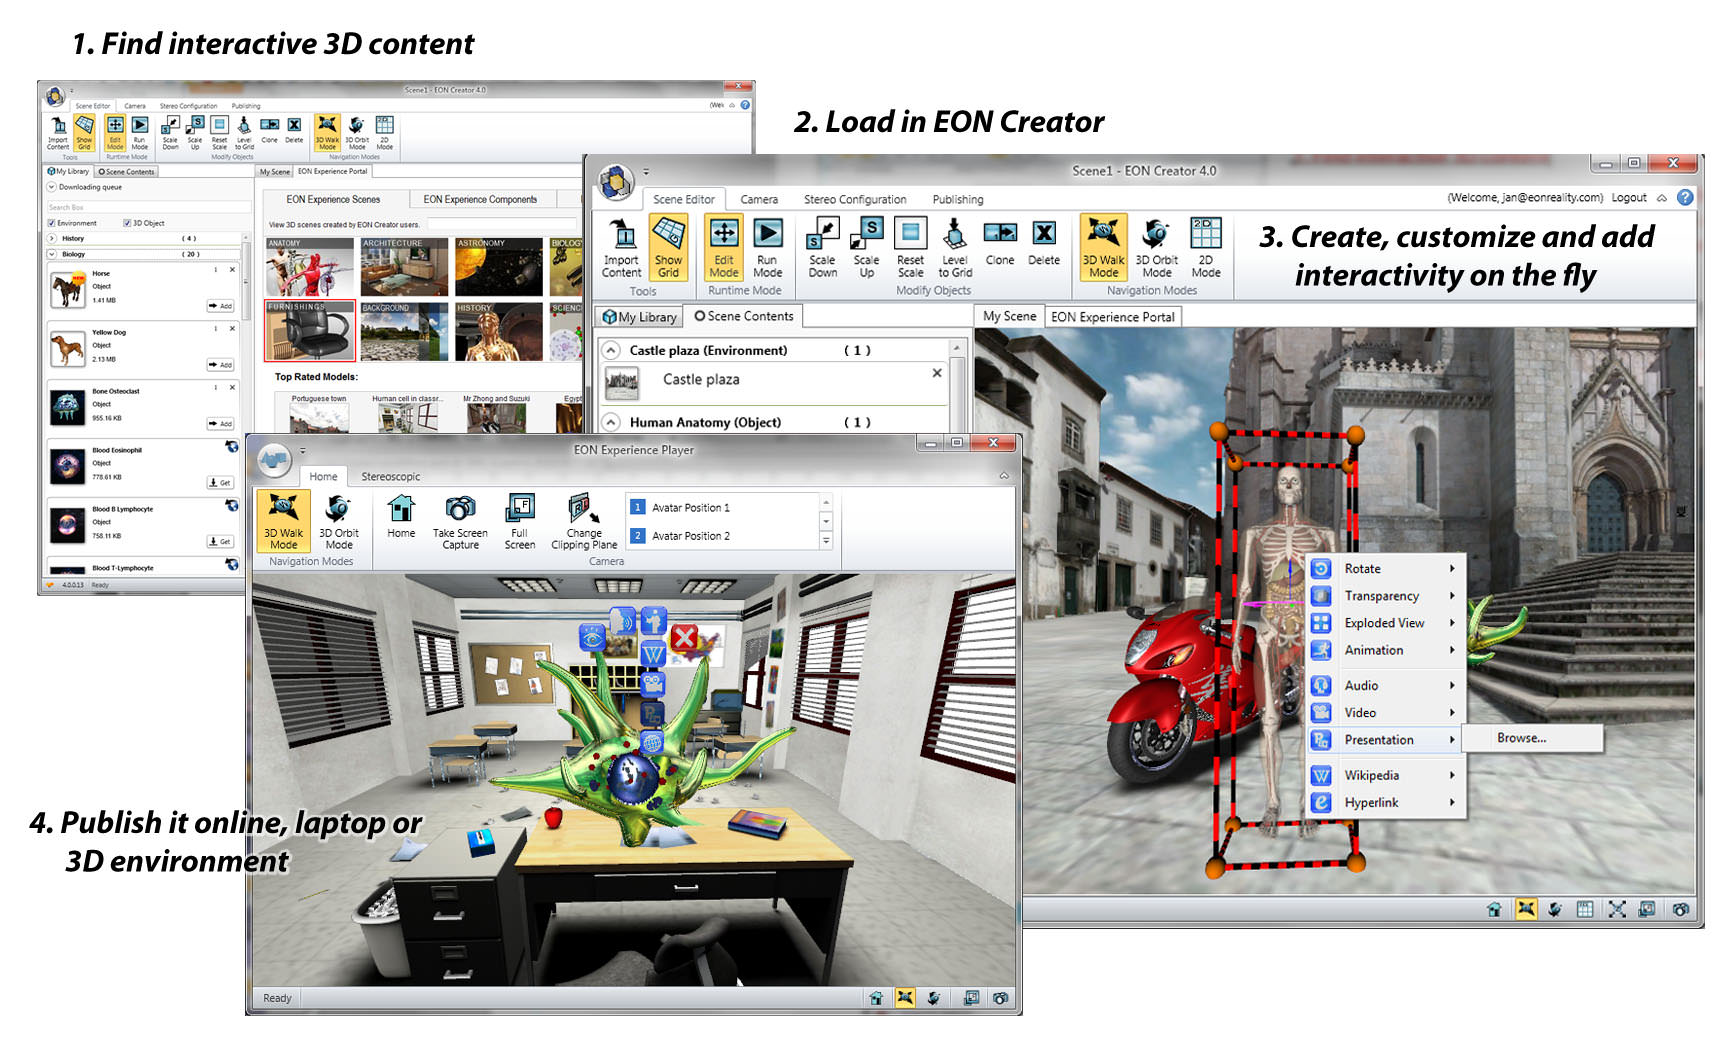 EON Reality Launches EON Creator 4.0 – Interactive 3D Content Creation and Cloud Based Storage Made Easy